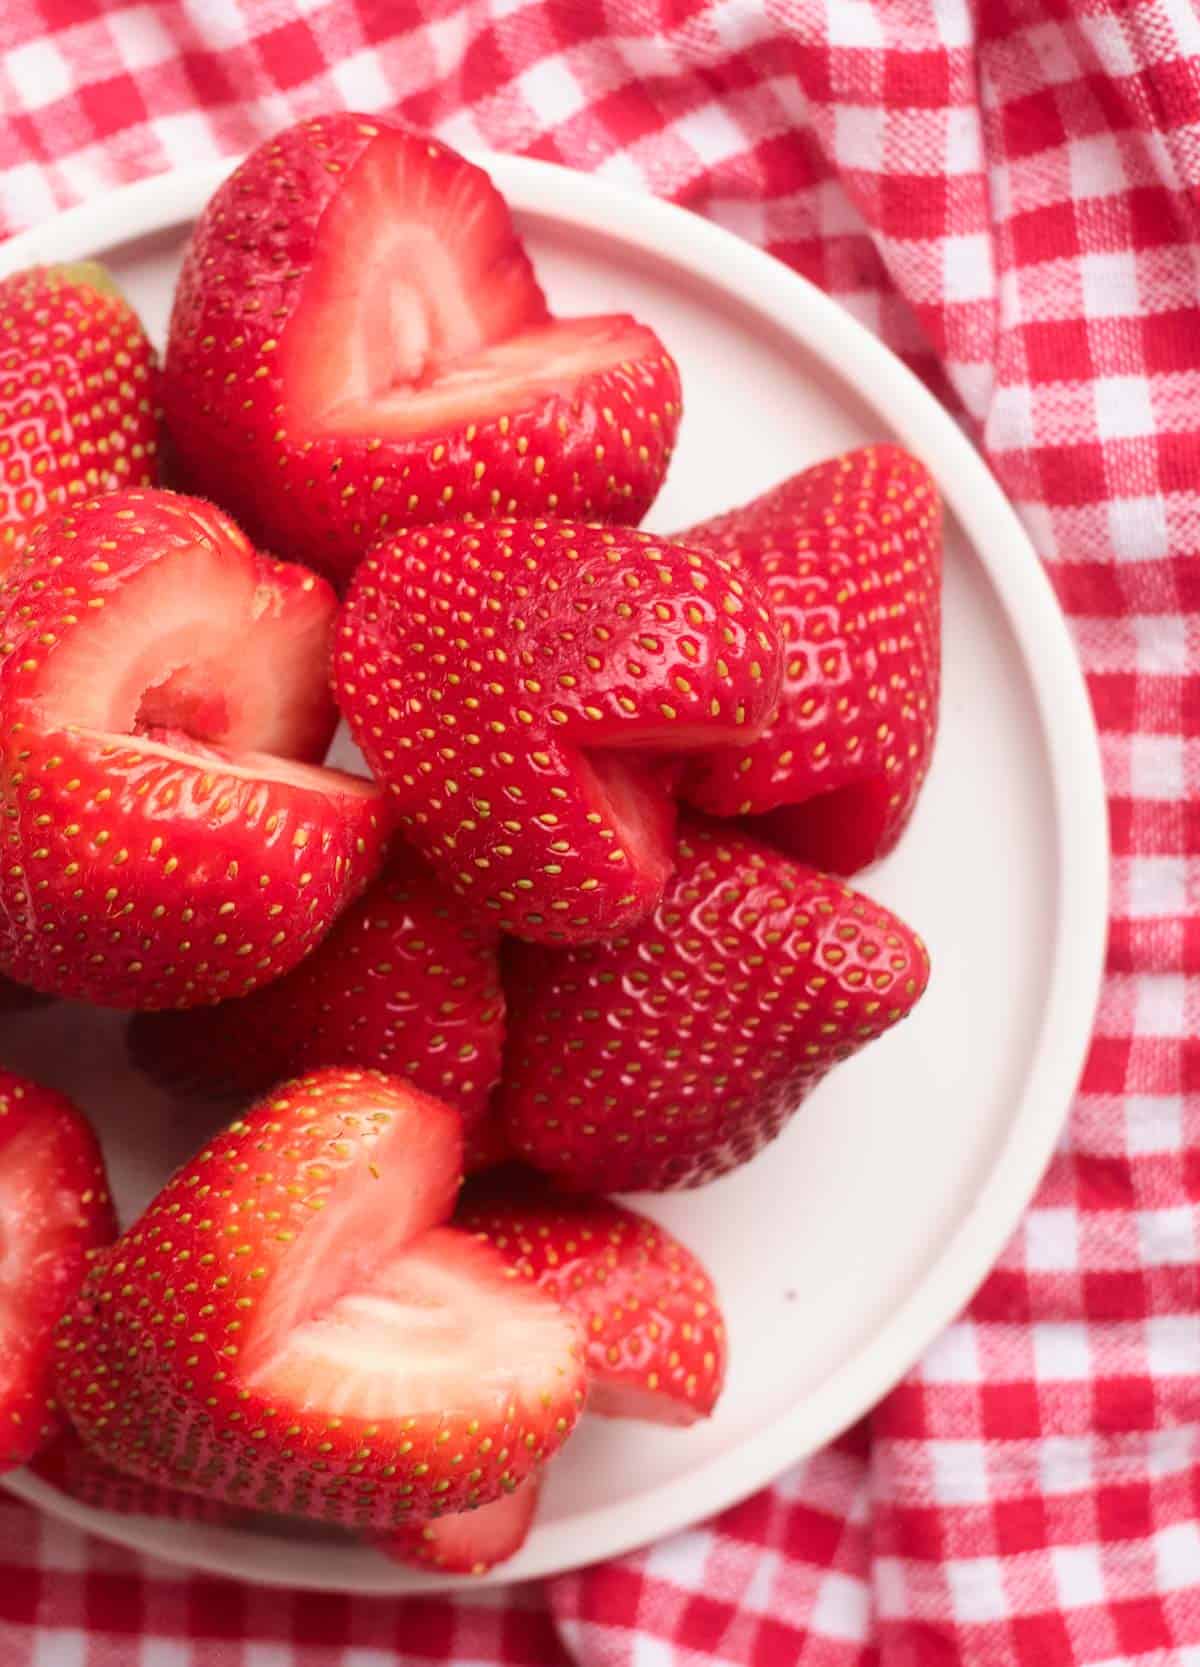 Strawberries but in heart shapes on white plate.